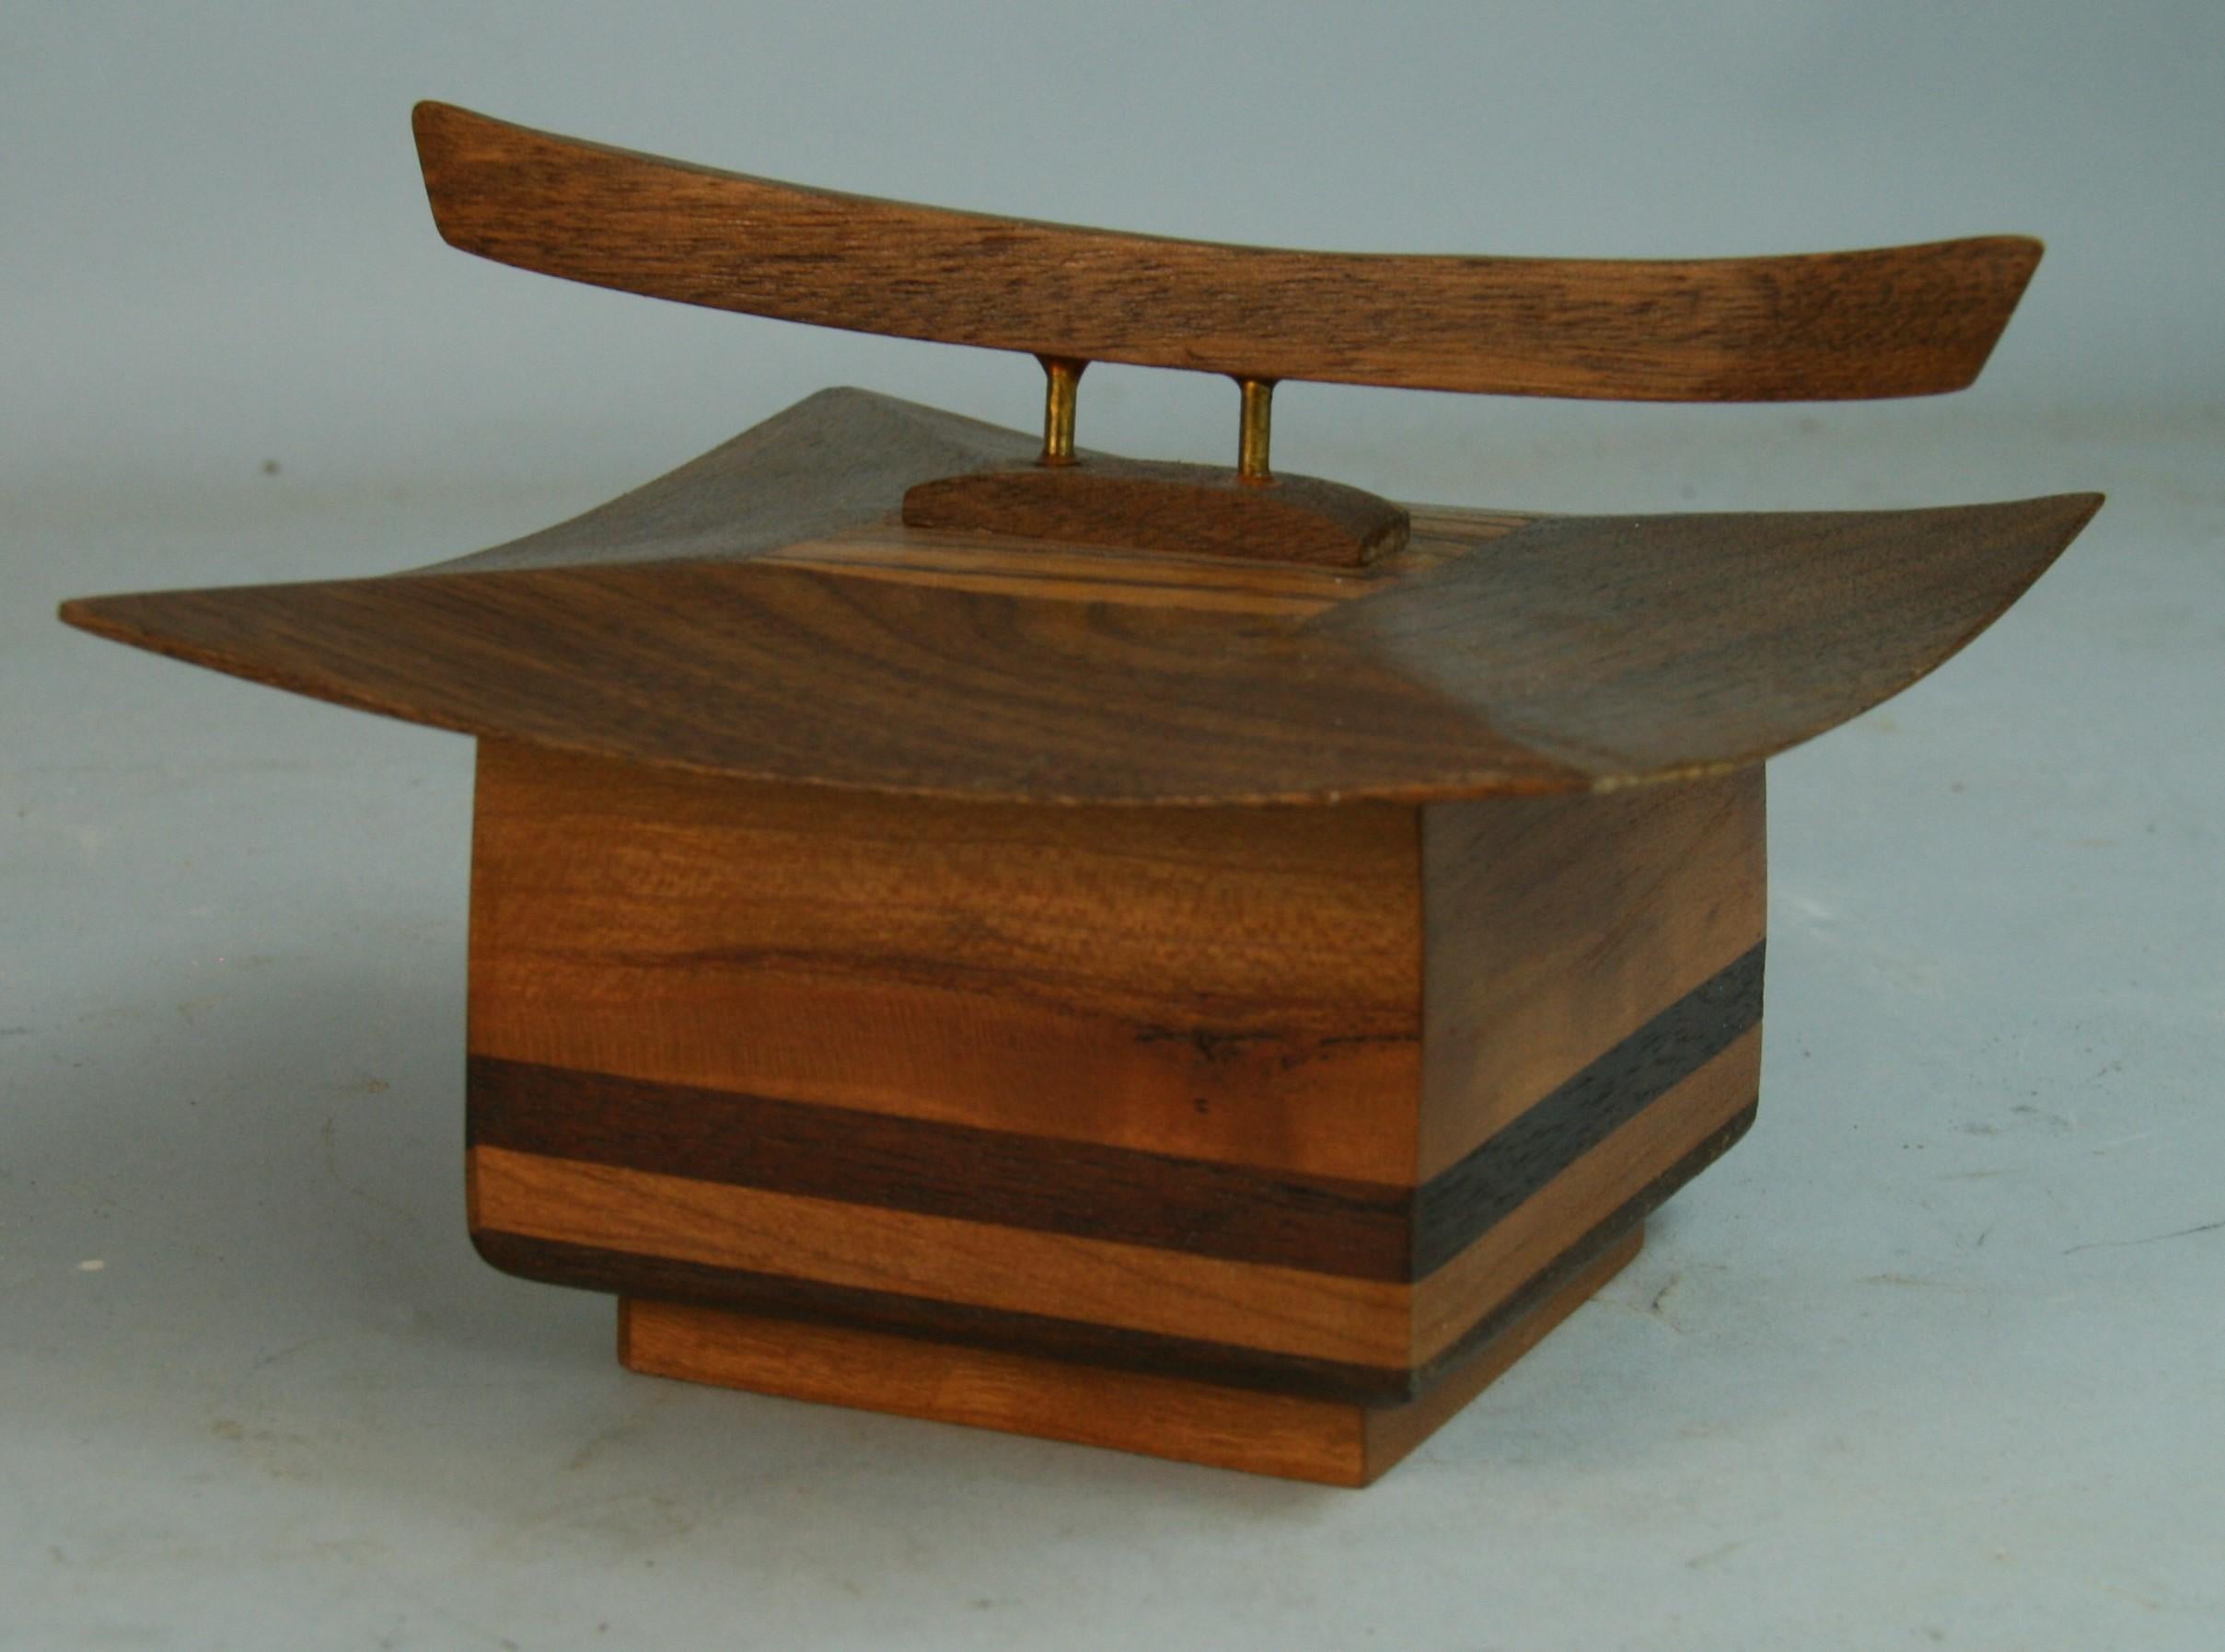 8-289  Japanese pagoda shaped trinket box made from walnut and oak with brass supporting the handle.